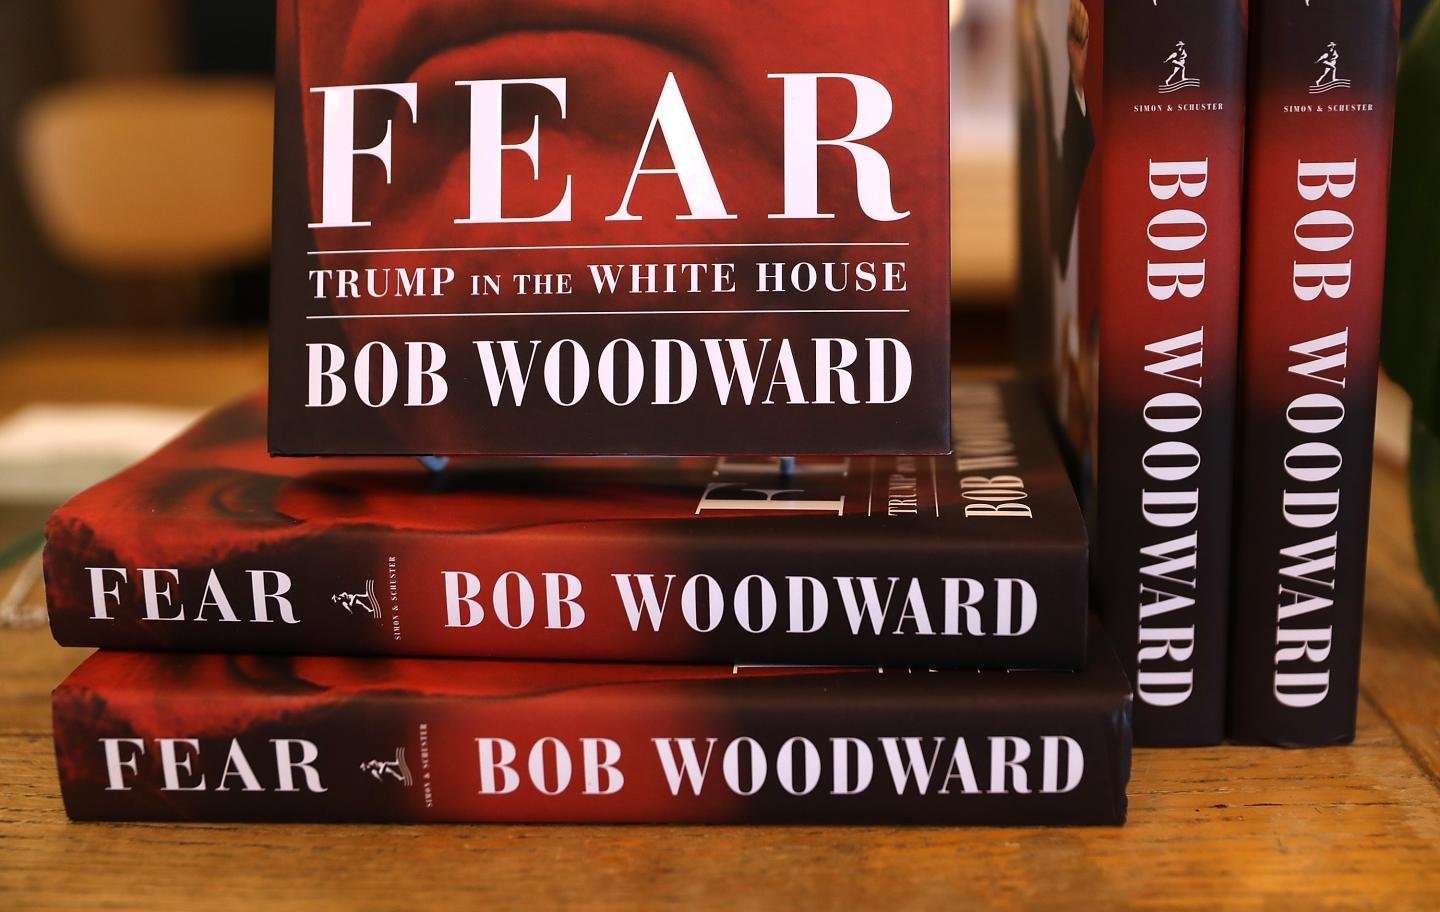 image for Bob Woodward’s Book Sold Almost as Many Copies in 1 Week as Donald Trump’s ‘Art of the Deal’ Has in 30 Years